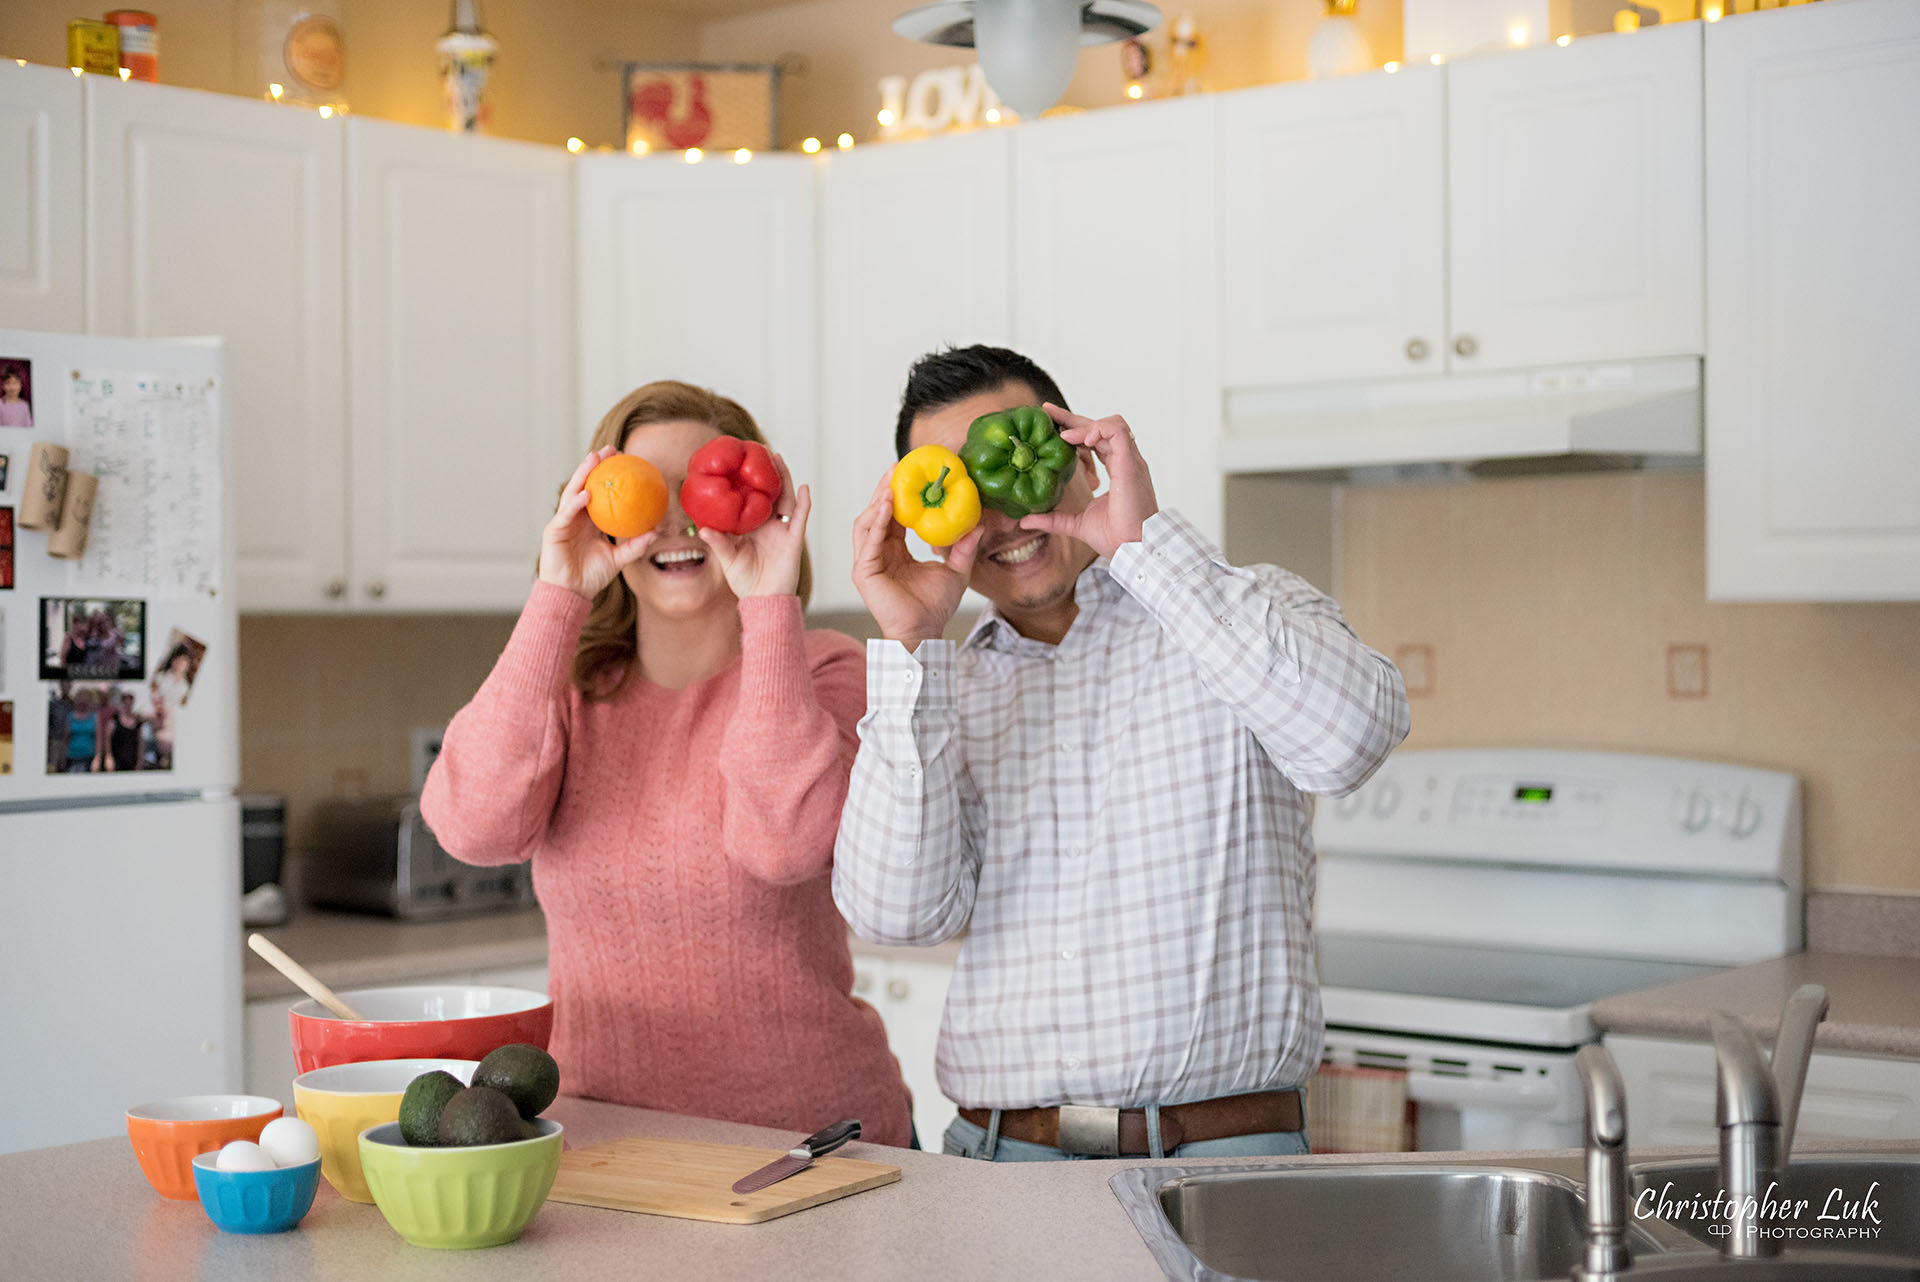 Christopher Luk Toronto Markham Family Adoption LifeBook Photographer Pictures Photos Children Session Parents Kitchen Preparation Life at Home Colourful Fun Bell Peppers Orange Eyes Eyeballs Funny